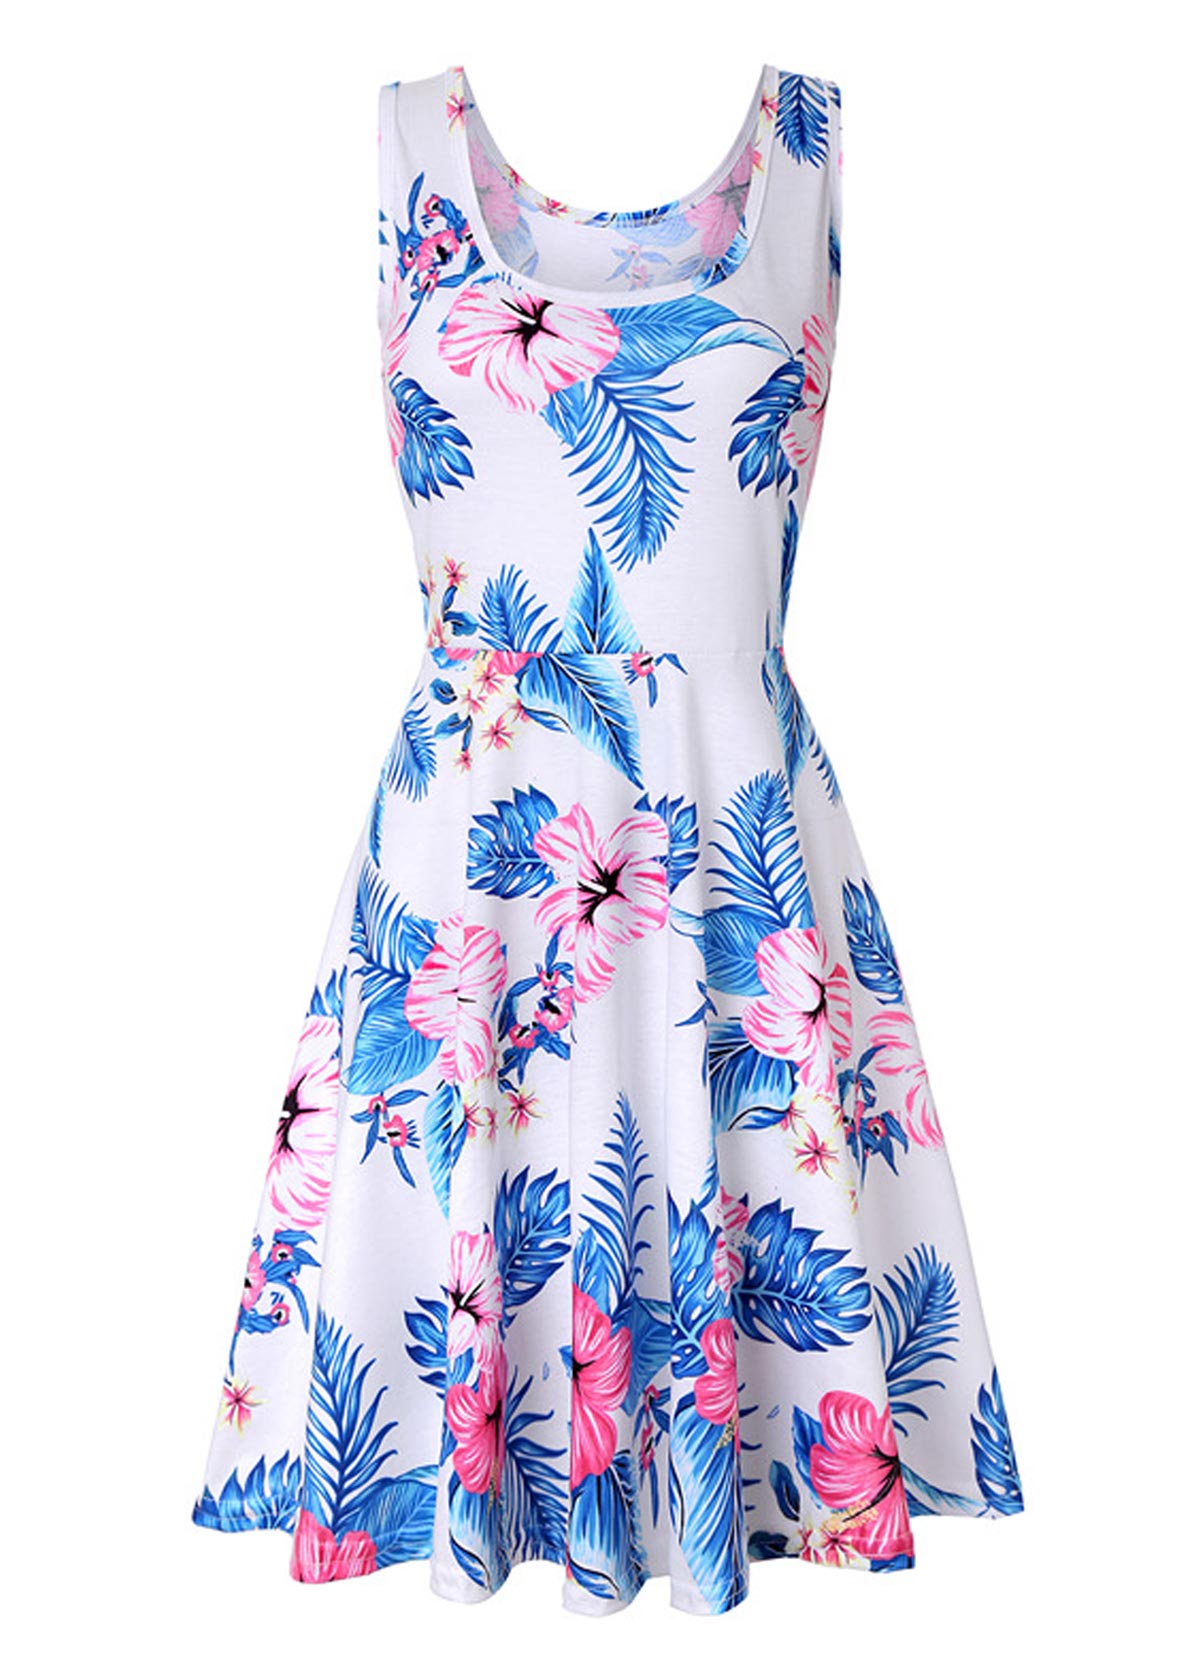 Floral and Leaf Print White Sleeveless Dress